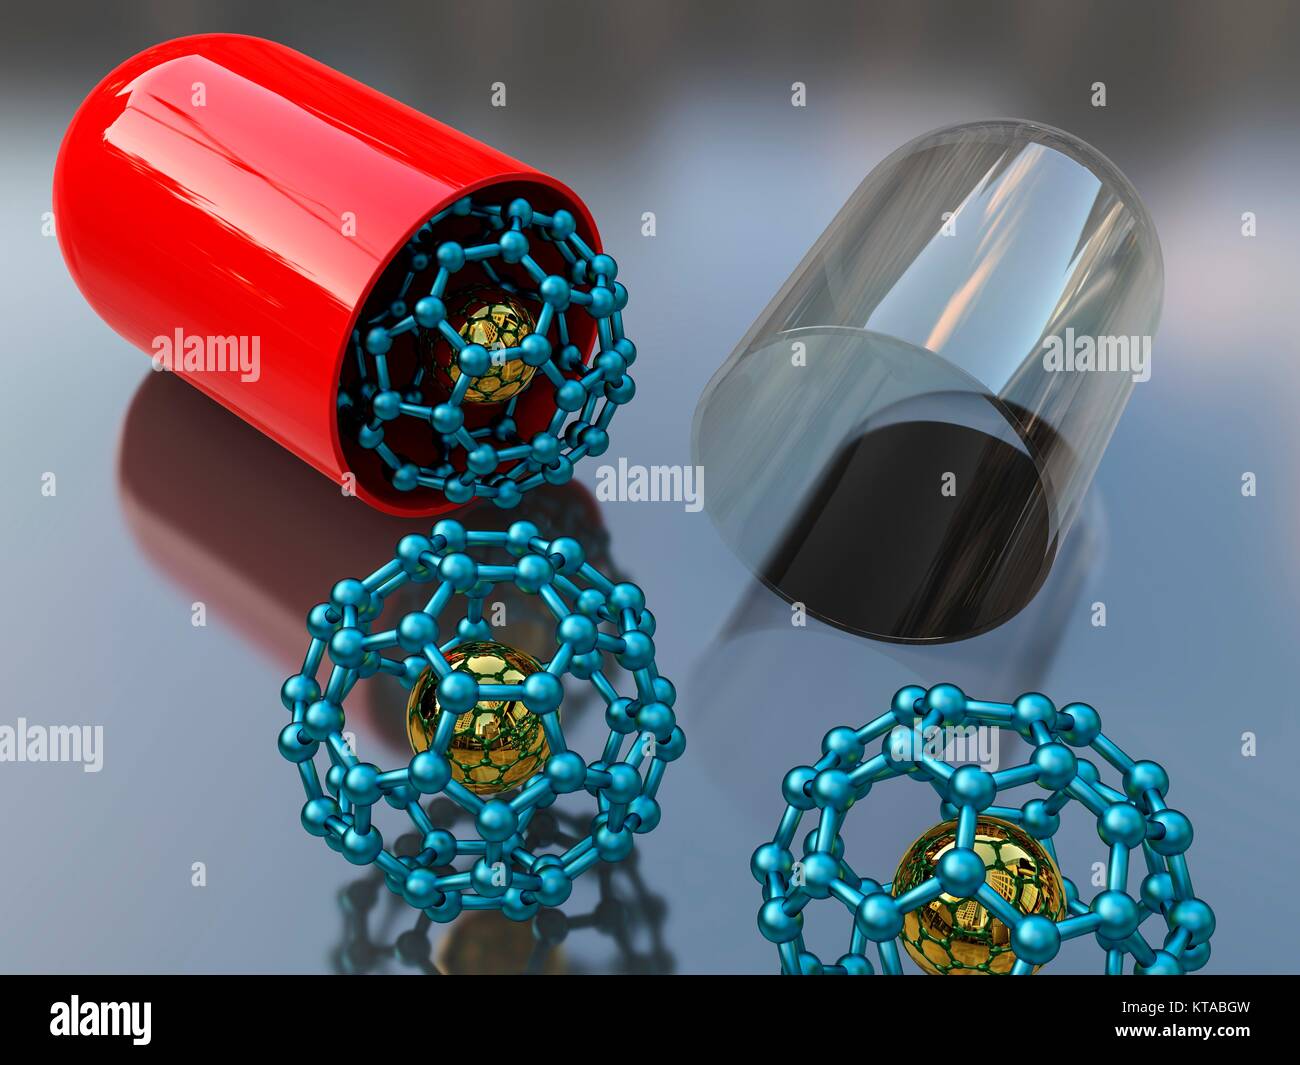 Medical nanoparticles. Conceptual illustration showing a modified-release dosage capsule containing C60 buckyballs (blue) doped with another atom (gold). It is thought that one day the ability of buckyballs to trap atoms within it might benefit the medical community. For example, they may be used to deliver medicines to specific tissues and cells. Stock Photo